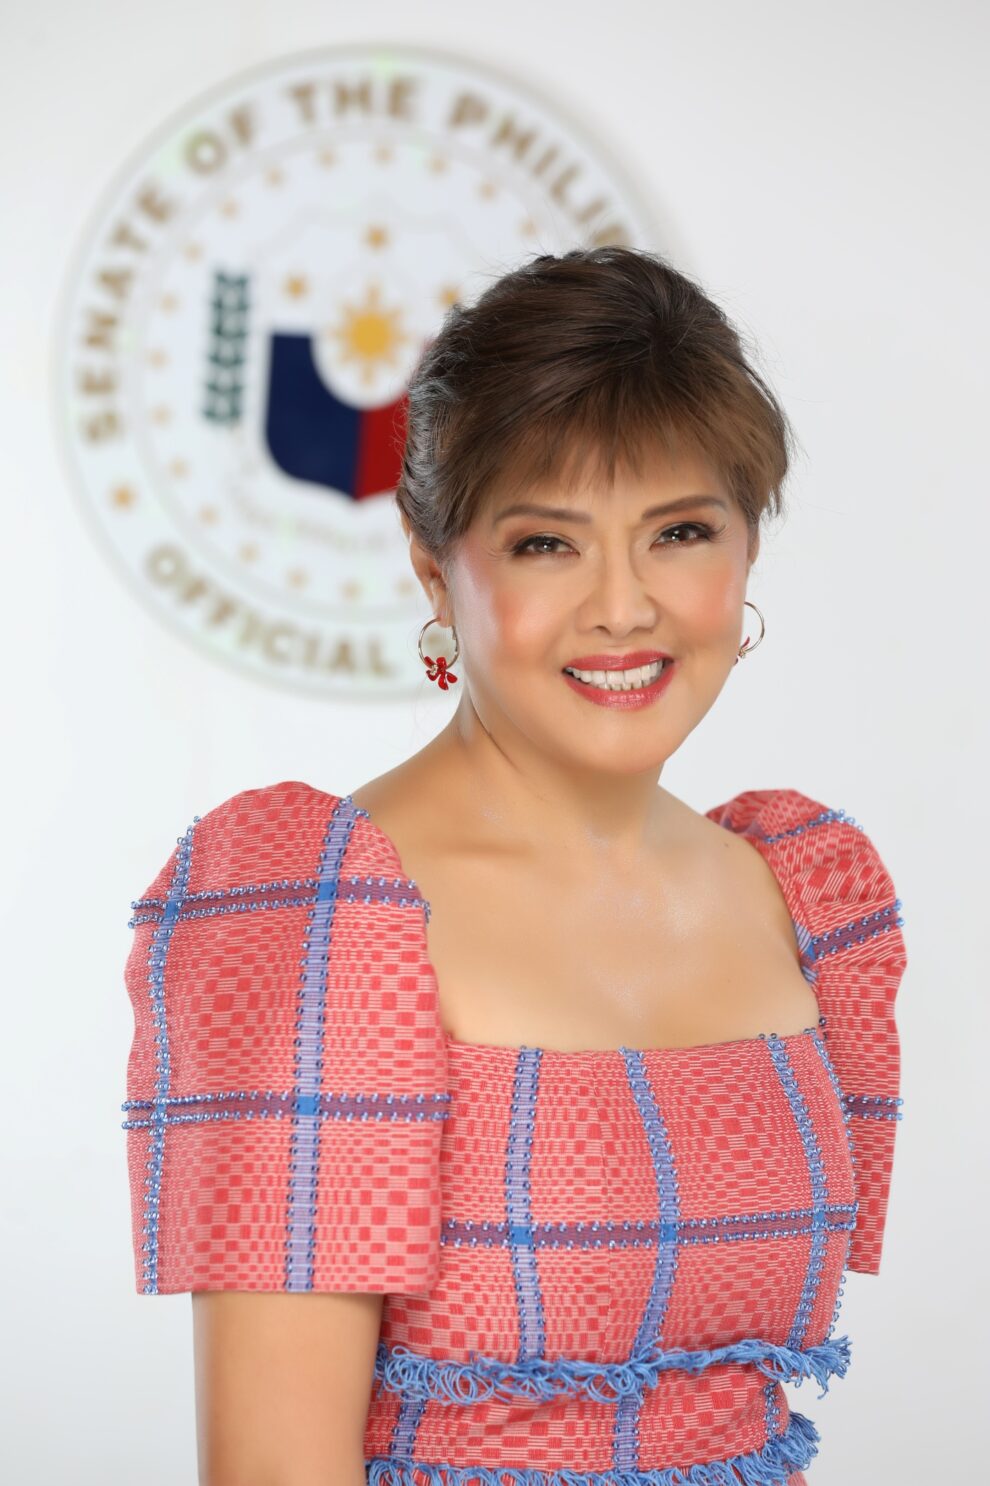 D:\ROBBY PERSONAL FILES 2013\RMA FILES\IMEE MARCOS\2021 MEDIA CAMPAIGN\PHOTOS\3.jpg